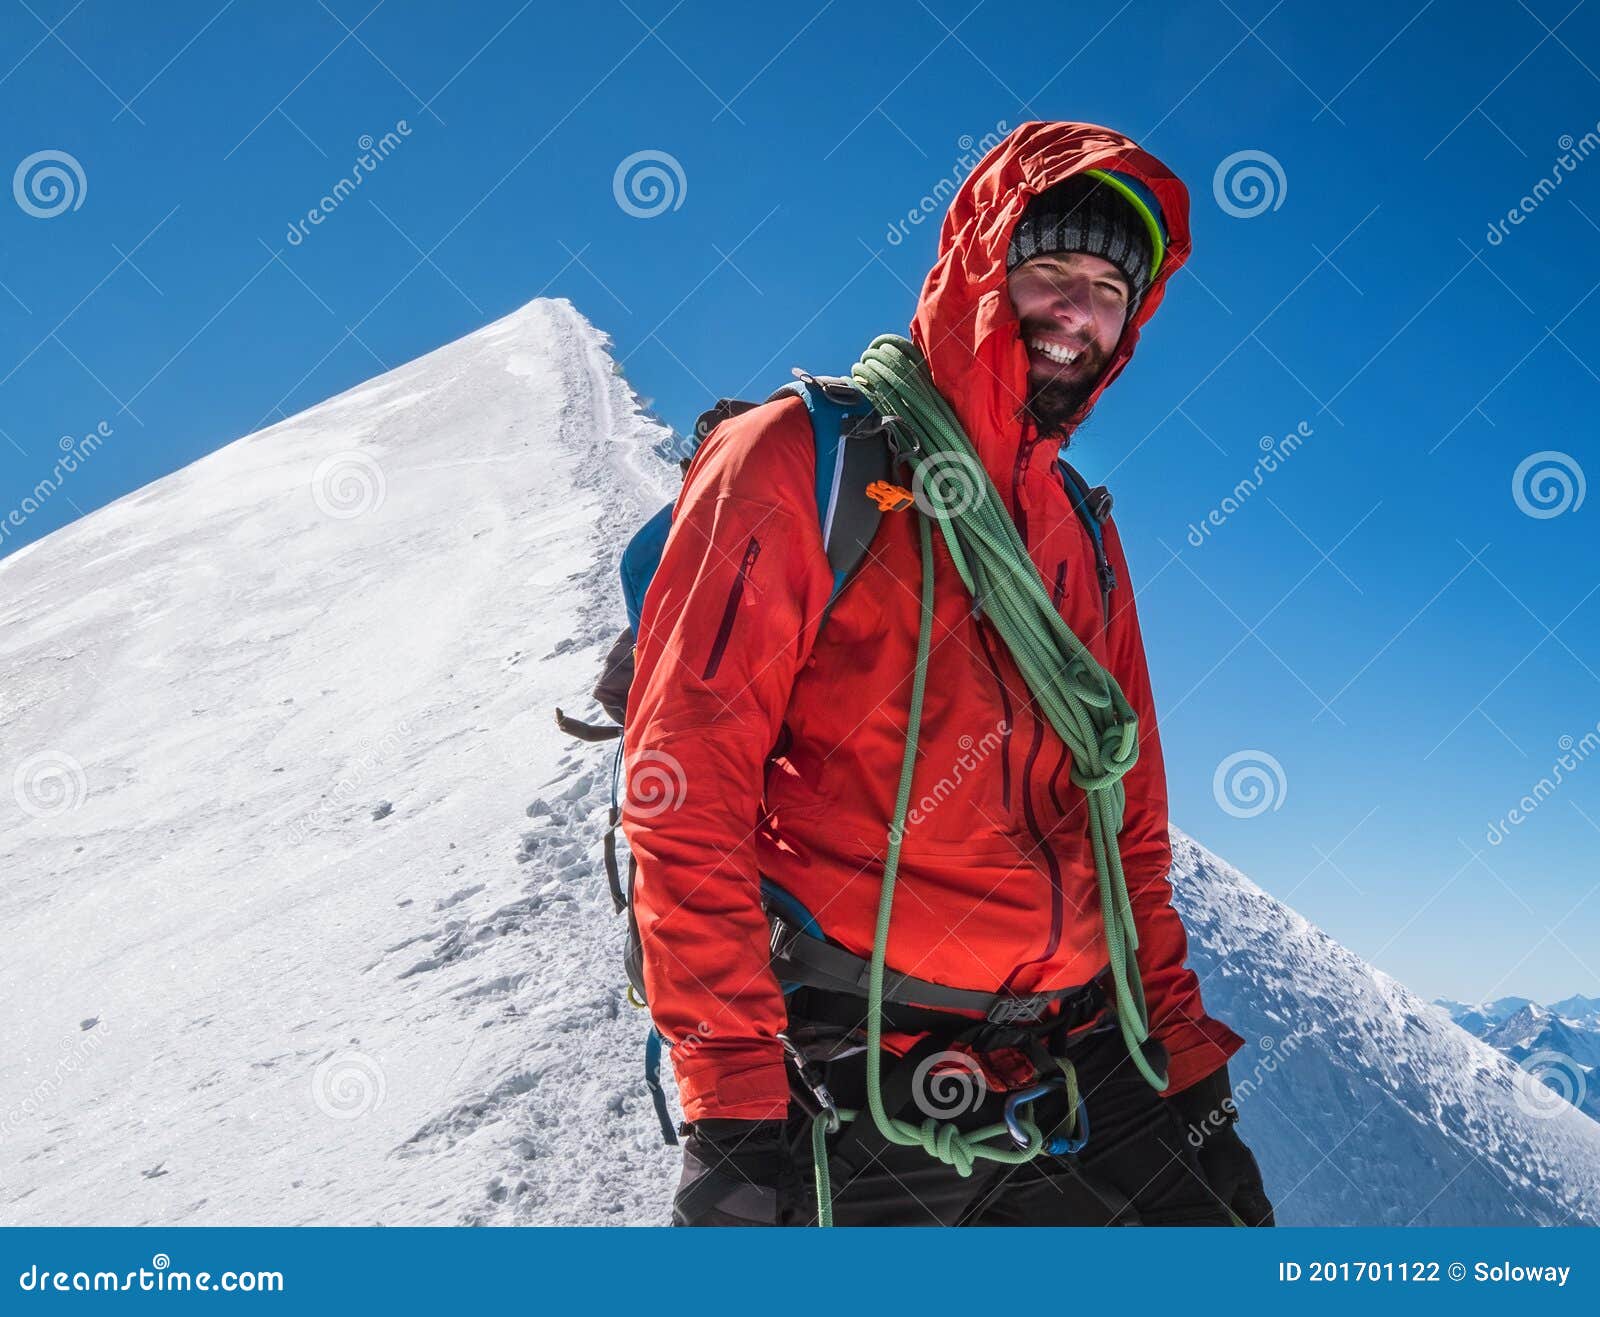 rope team happy smiling man in climbing harness dressed red mountaineering clothes last steps before mont blanc monte bianco